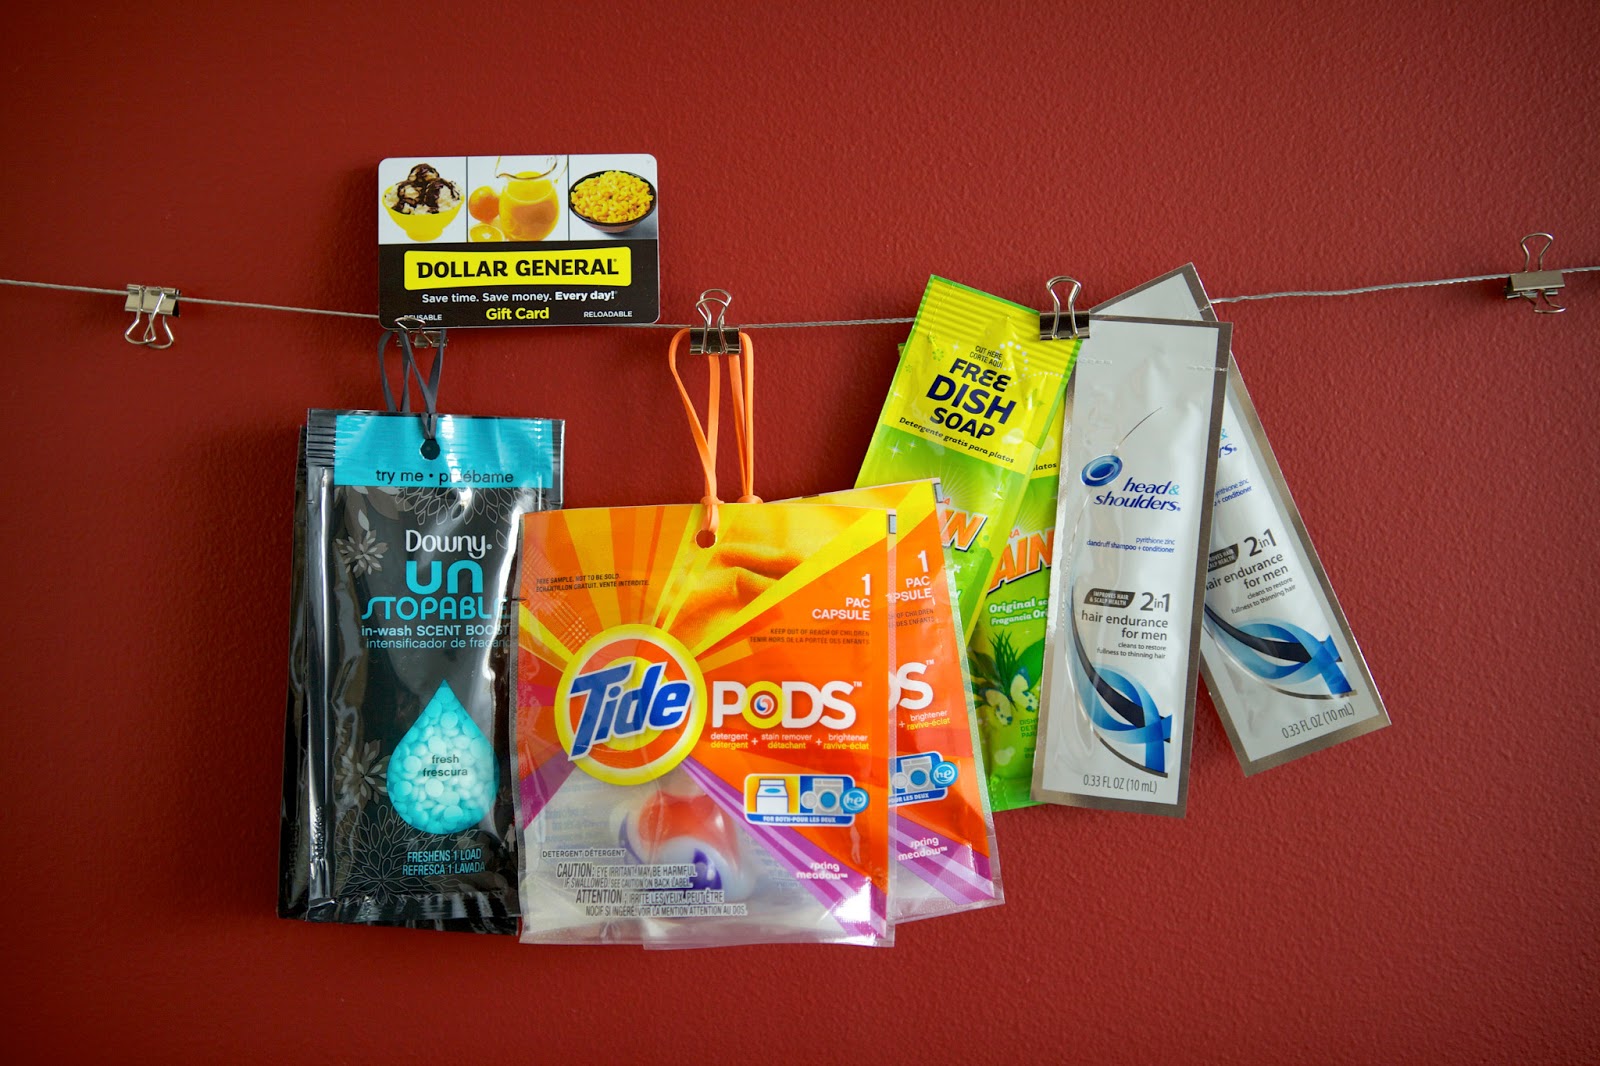 P&G giveaway